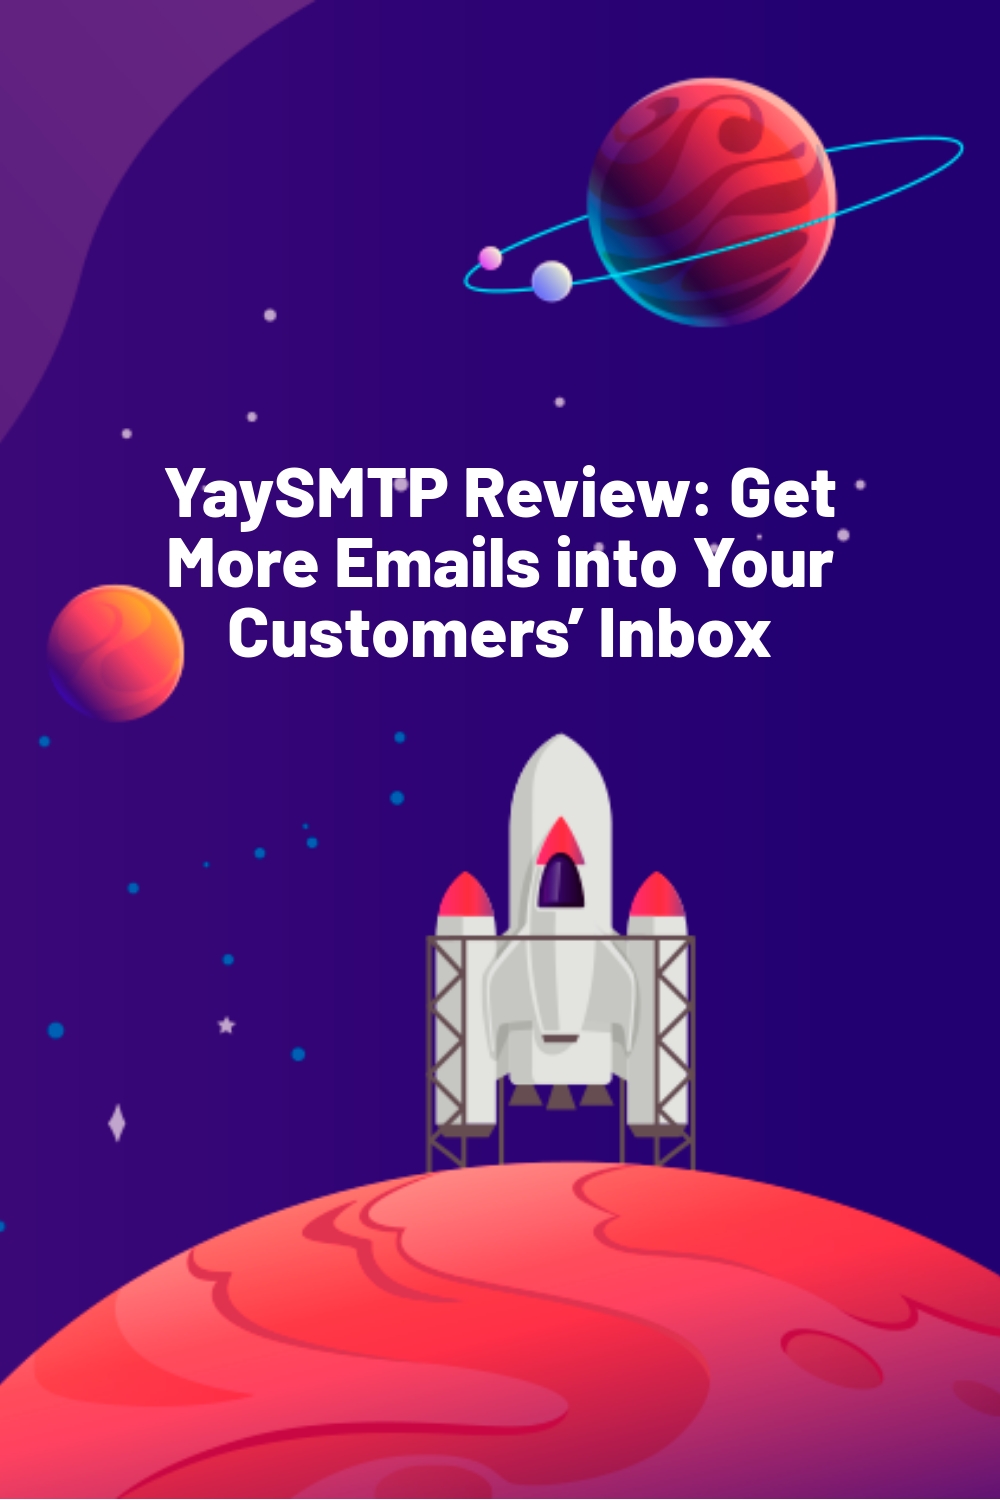 YaySMTP Review: Get More Emails into Your Customers’ Inbox